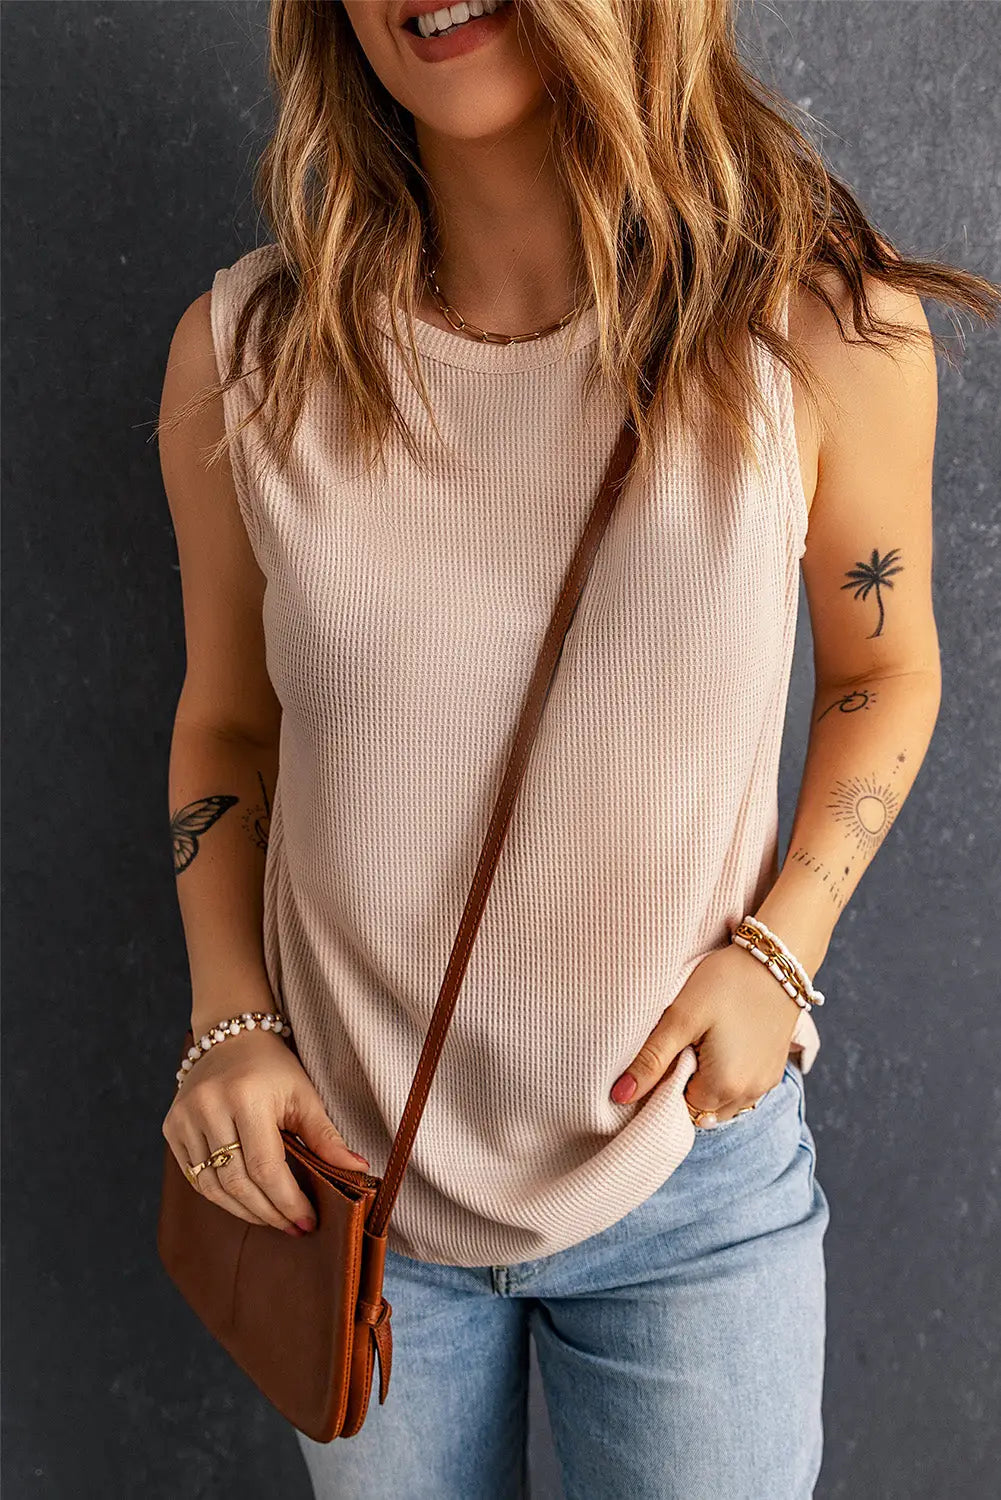 Apricot crew neck waffle tank top - s / 95% polyester + 5% spandex - tops